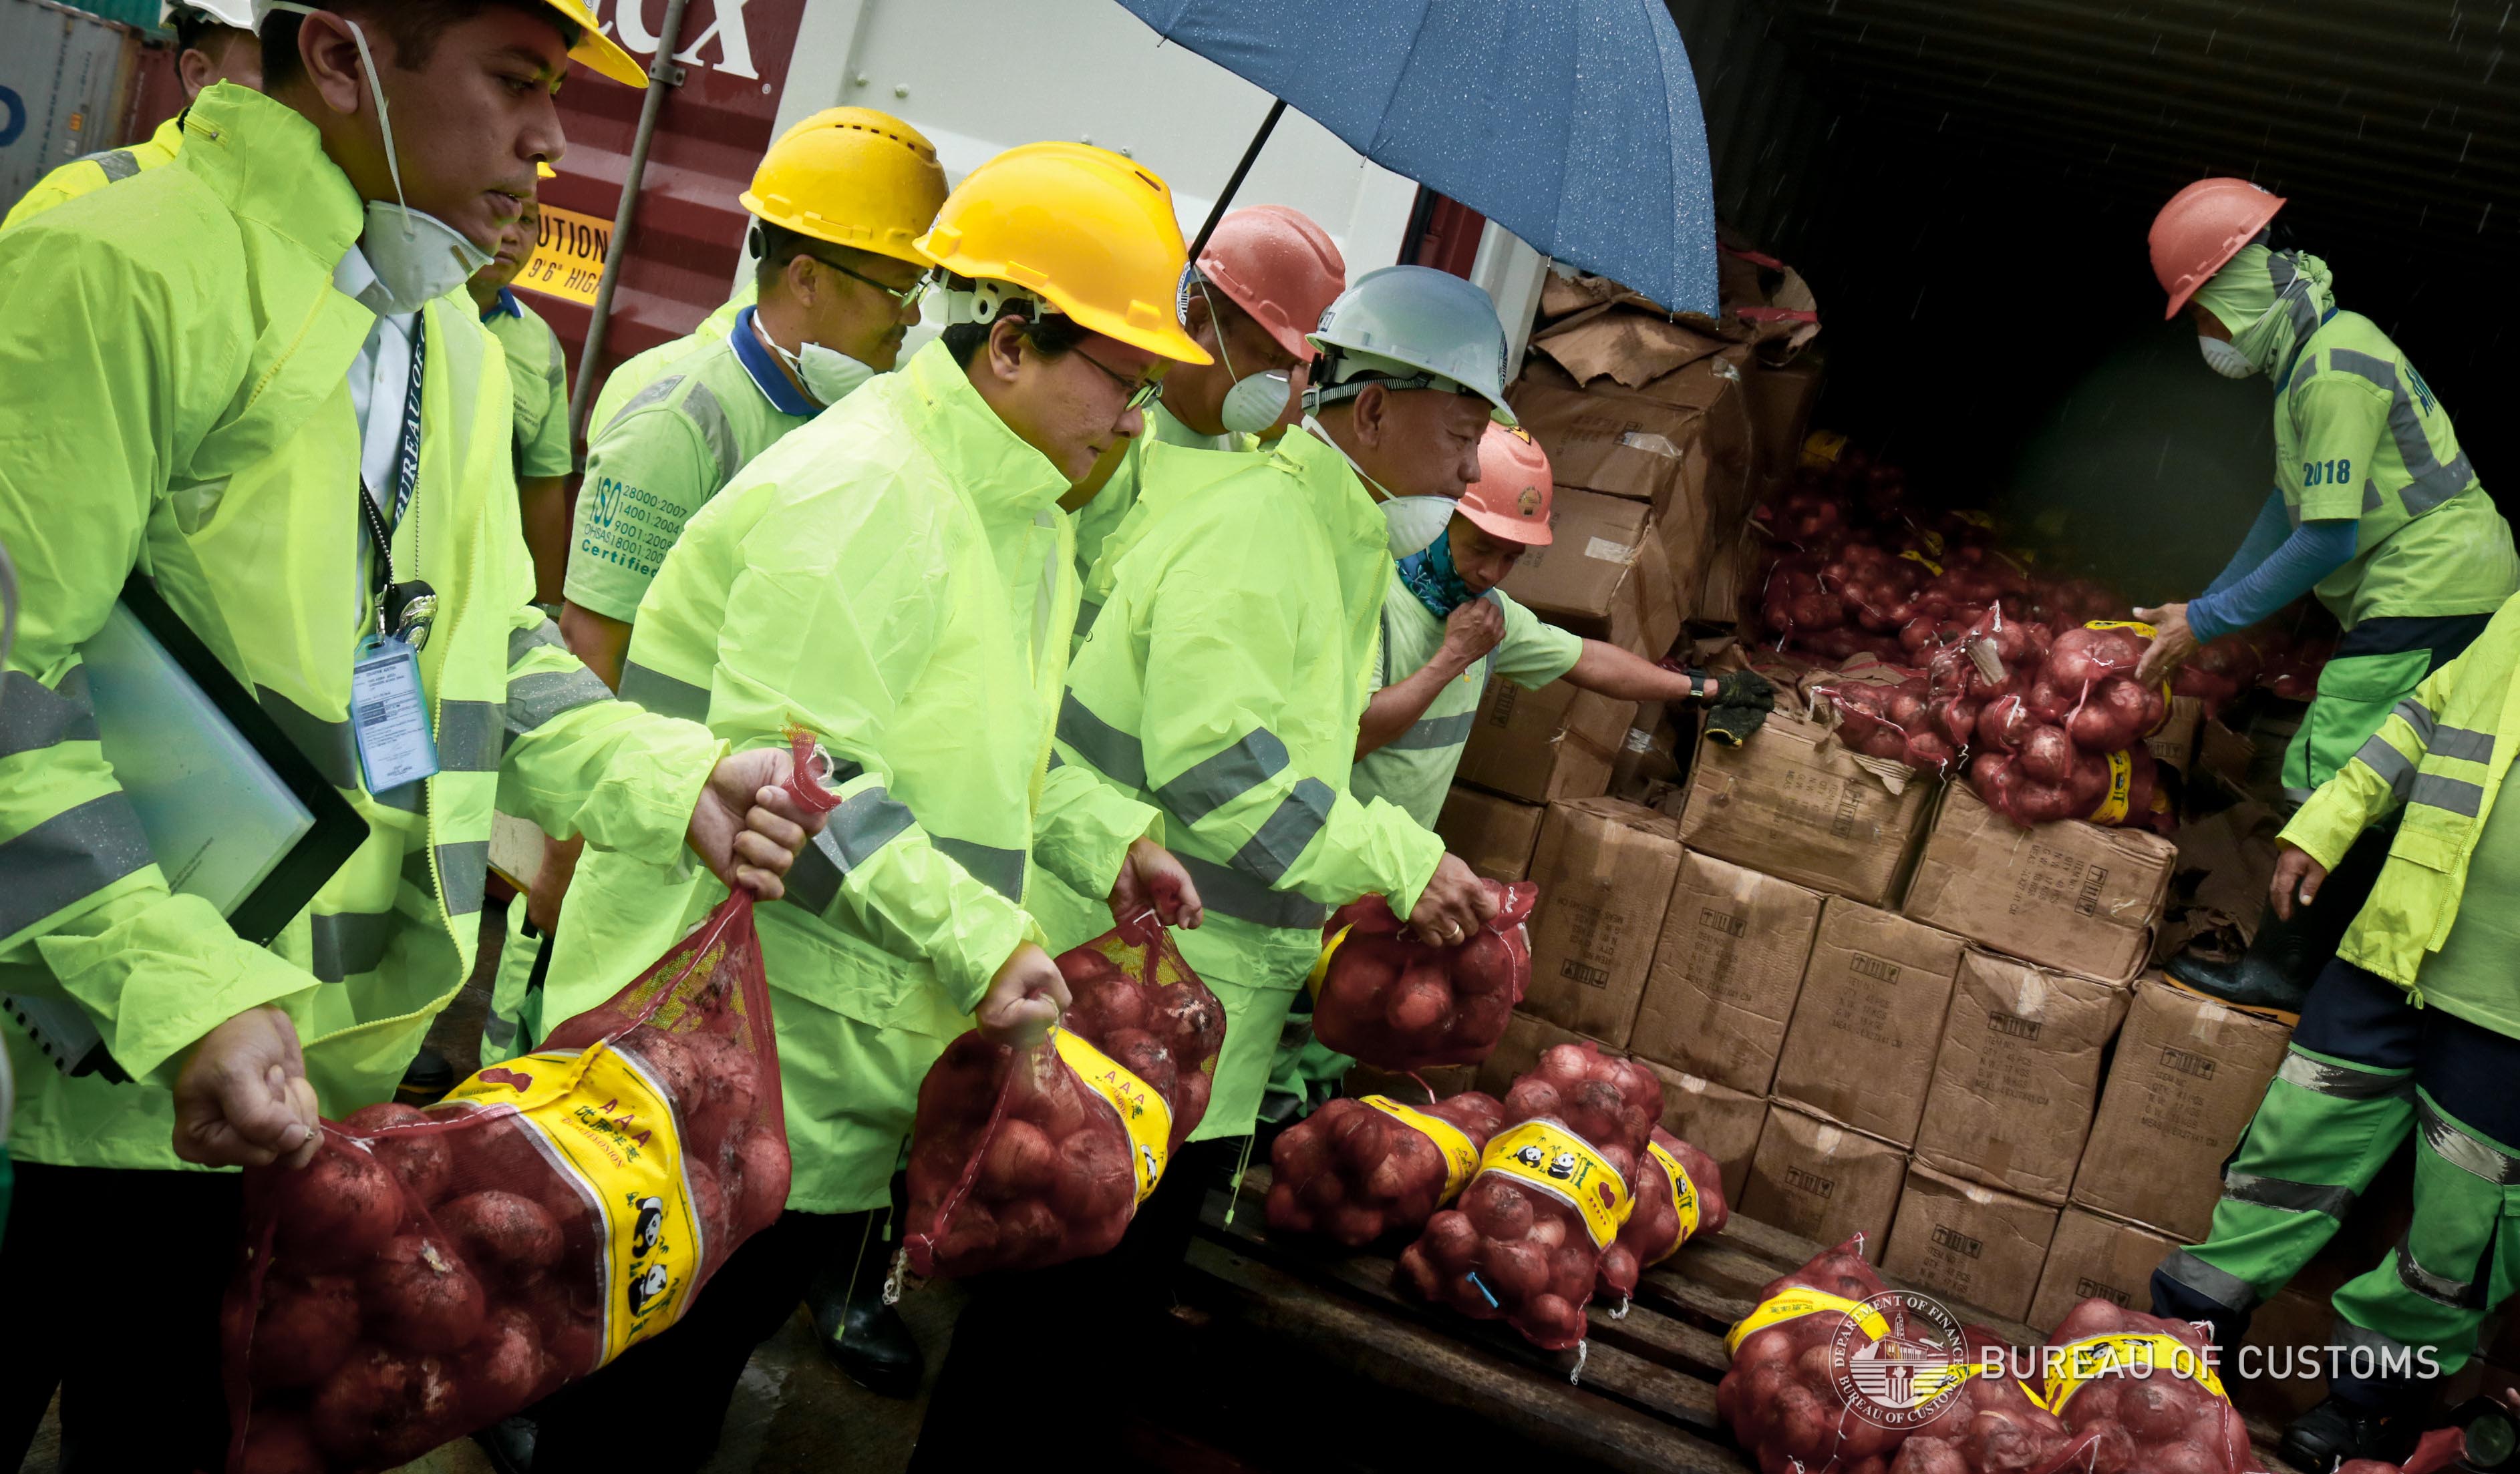 Smuggled onions from China confiscated by the Bureau of Customs. PHOTO FROM BOC